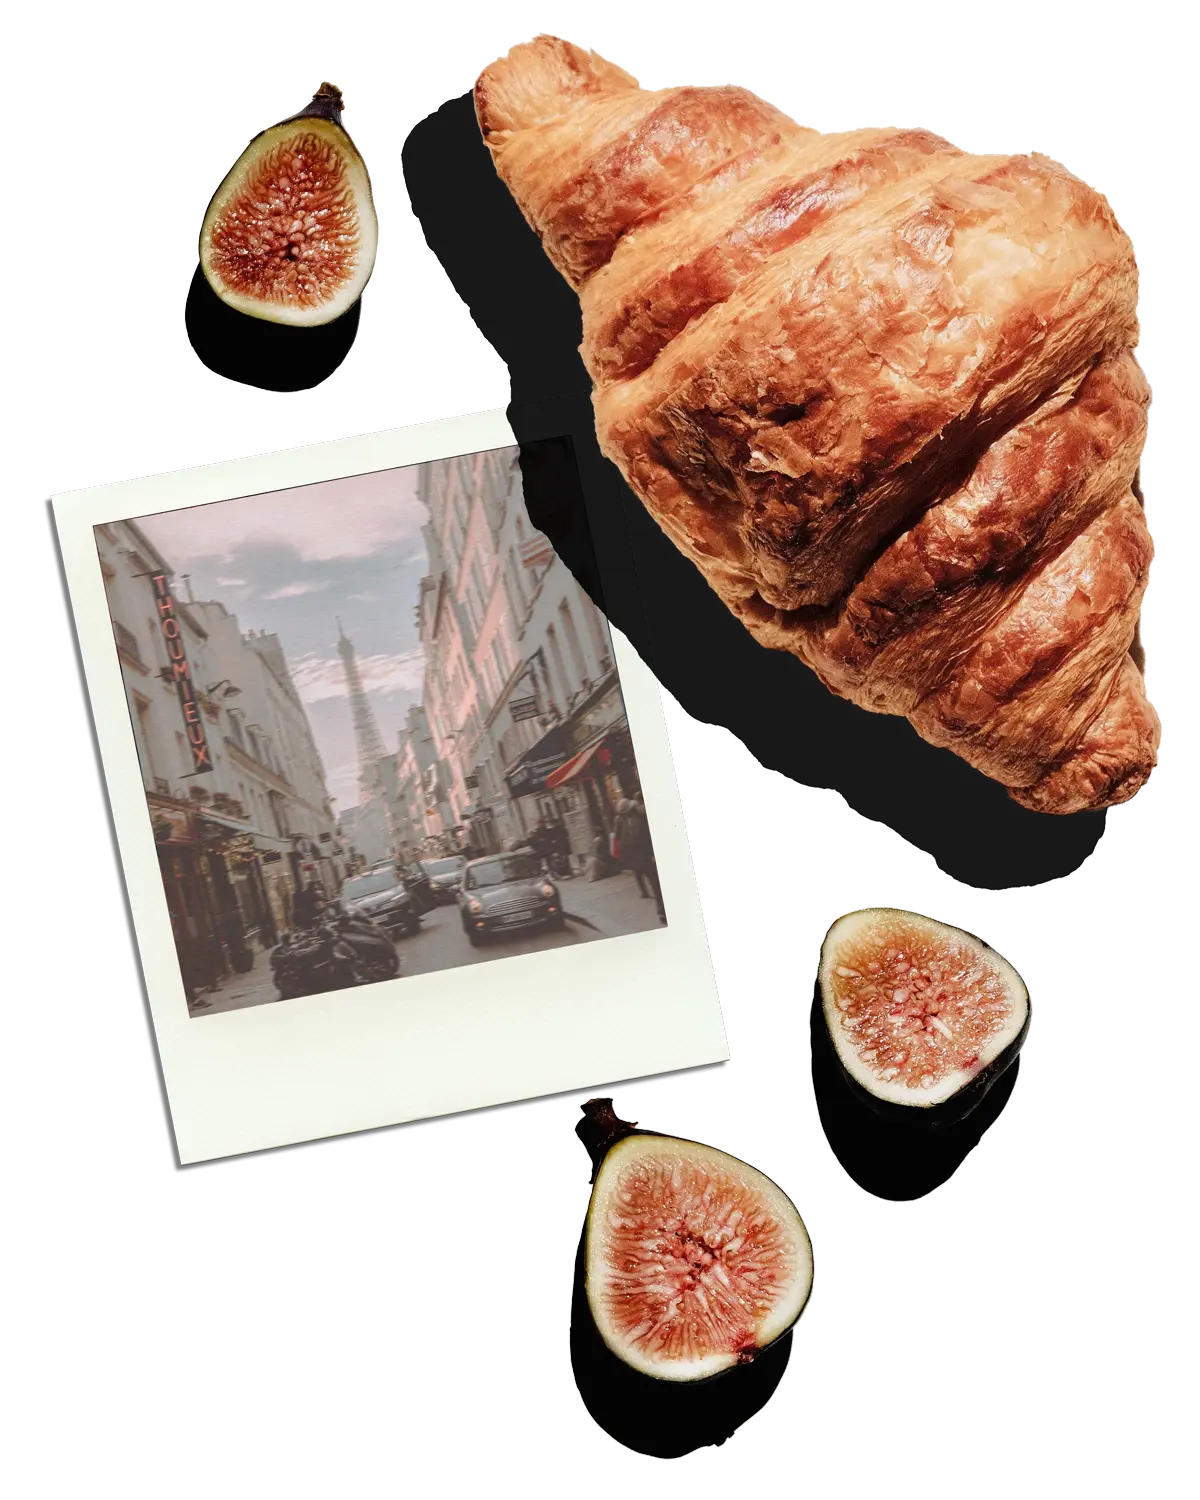 a croissant and figs scattered on a white background with a polaroid photograph of the Eiffel Tower